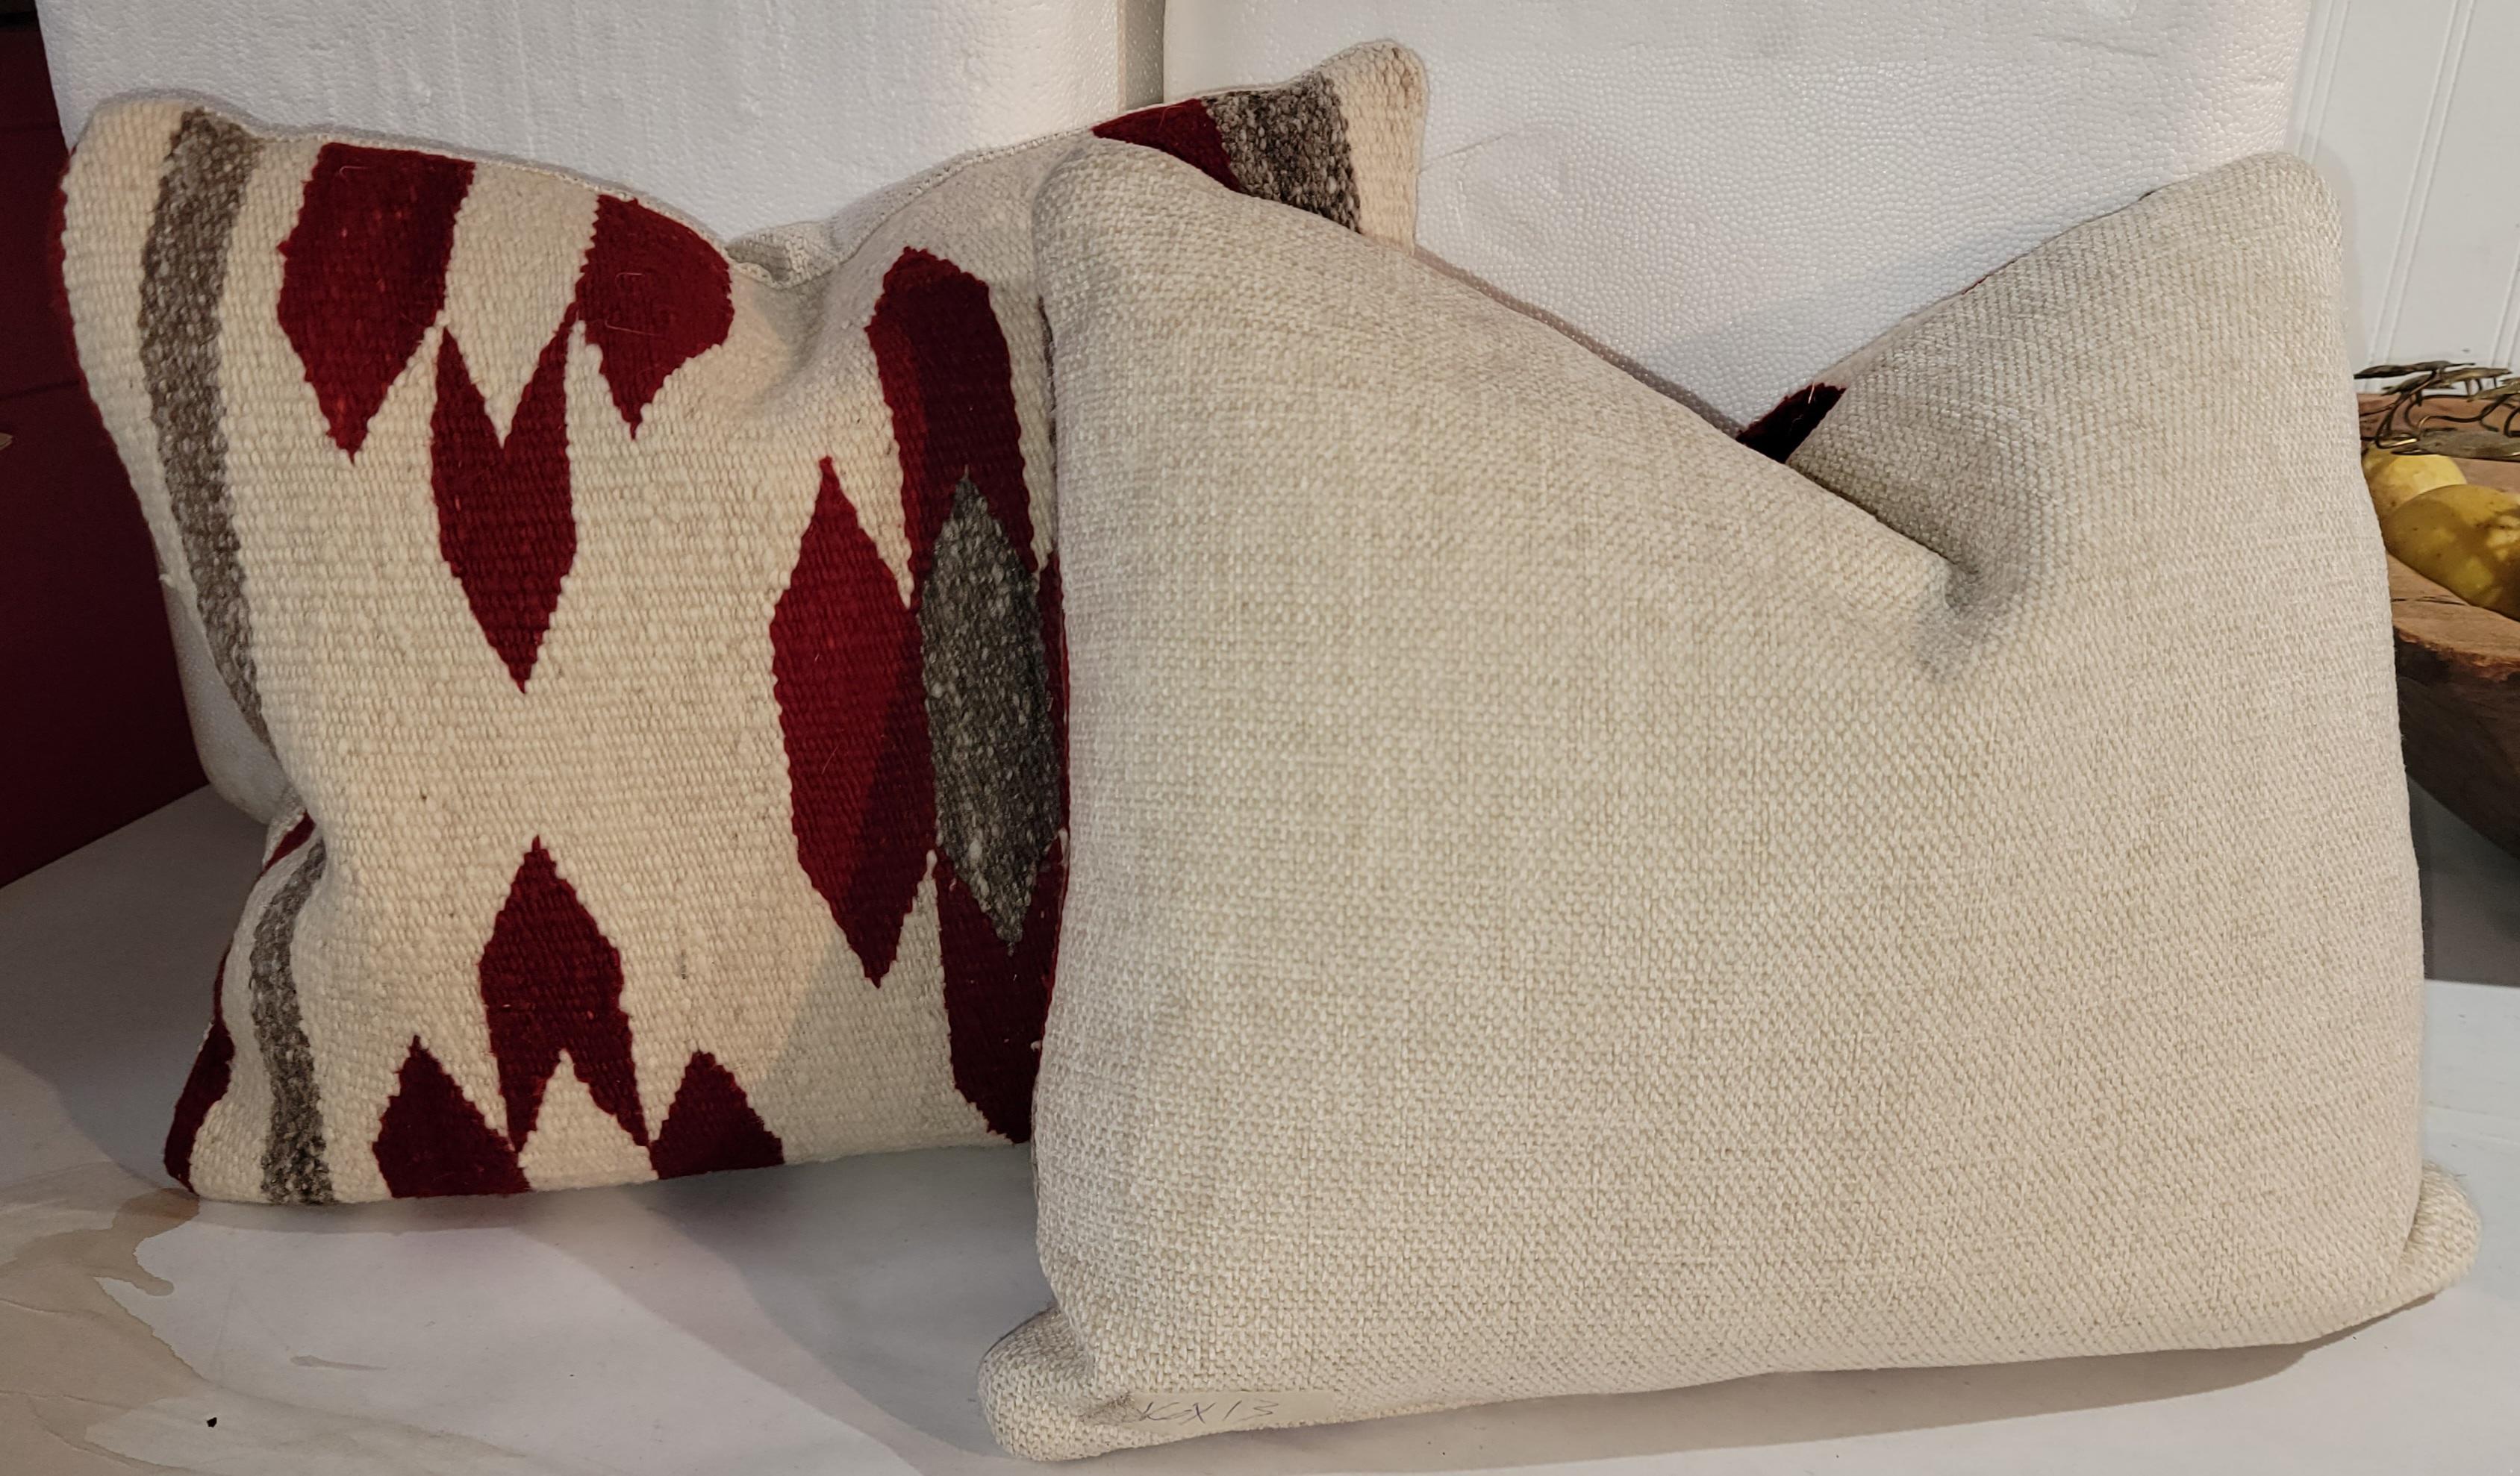 Red and white Navajo chevron pillows with gray stripes. This beautiful pair of pillows has great color in a subtle way. The chevrons are in a four pattern as to make a barrier. The white backing completes the full circle look of the pillows. The